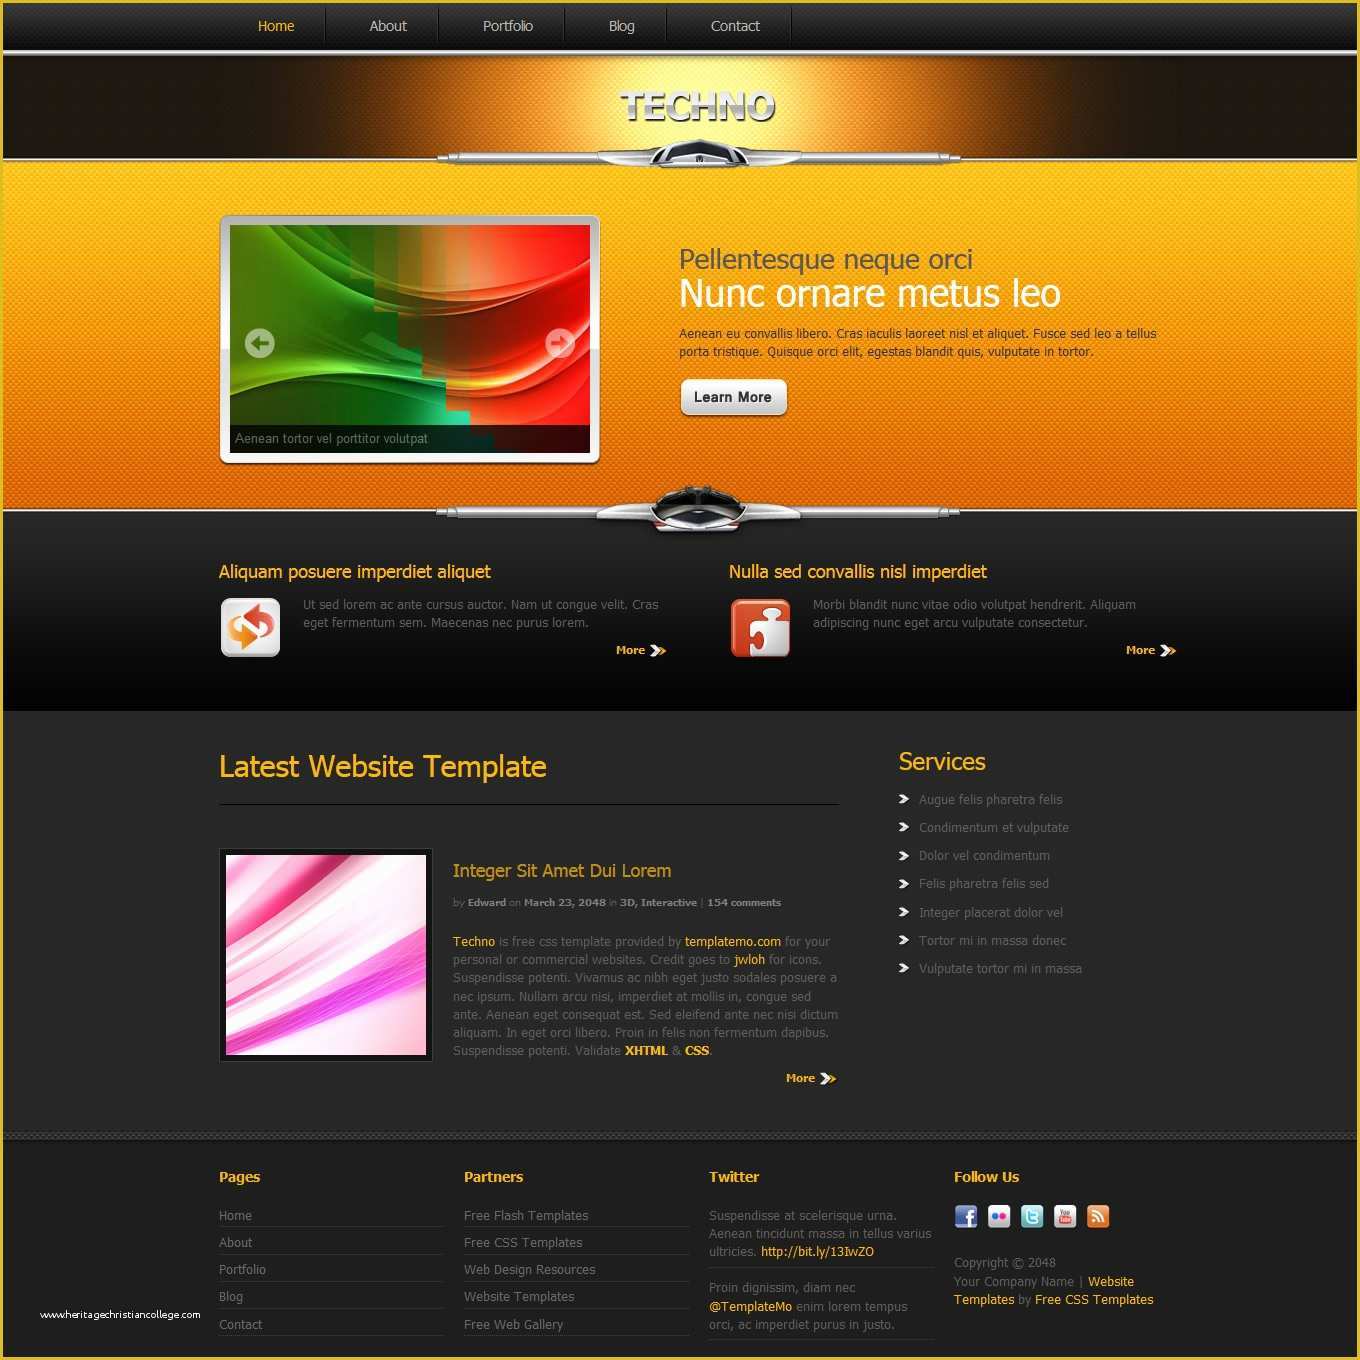 Online Store HTML Template Free Of Best Free Css Templates for the Year 2012